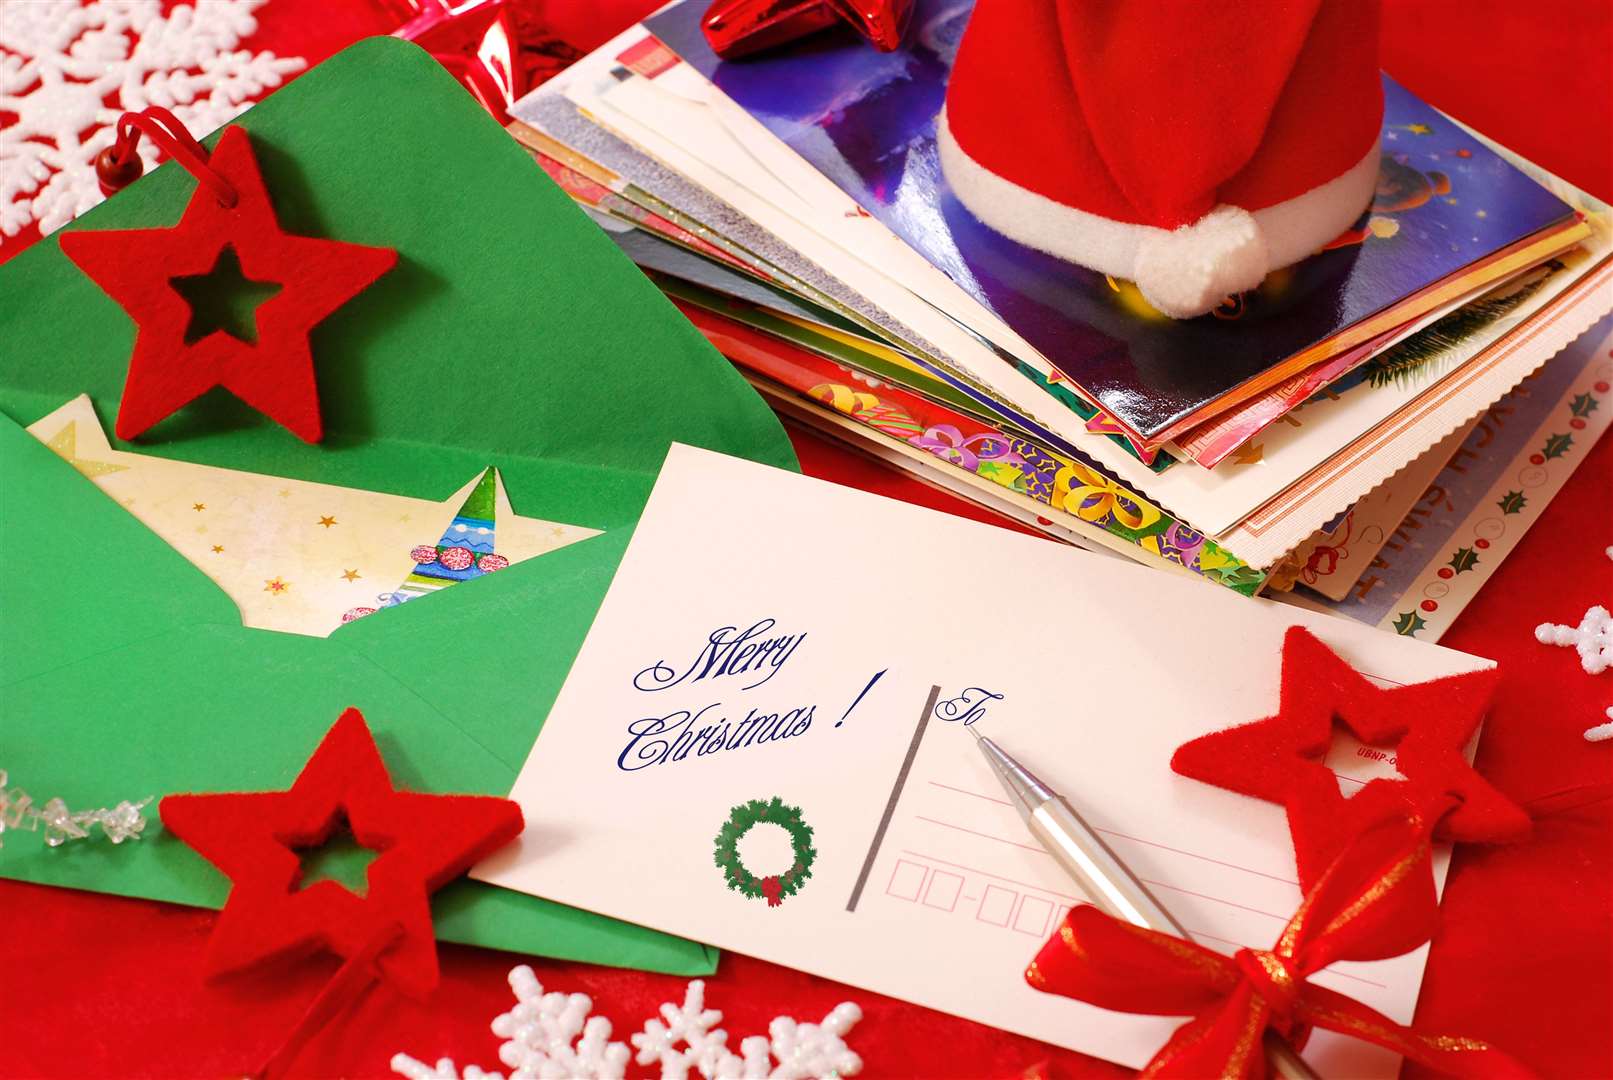 Many people are choosing to donate to charity instead of buying and sending Christmas cards.